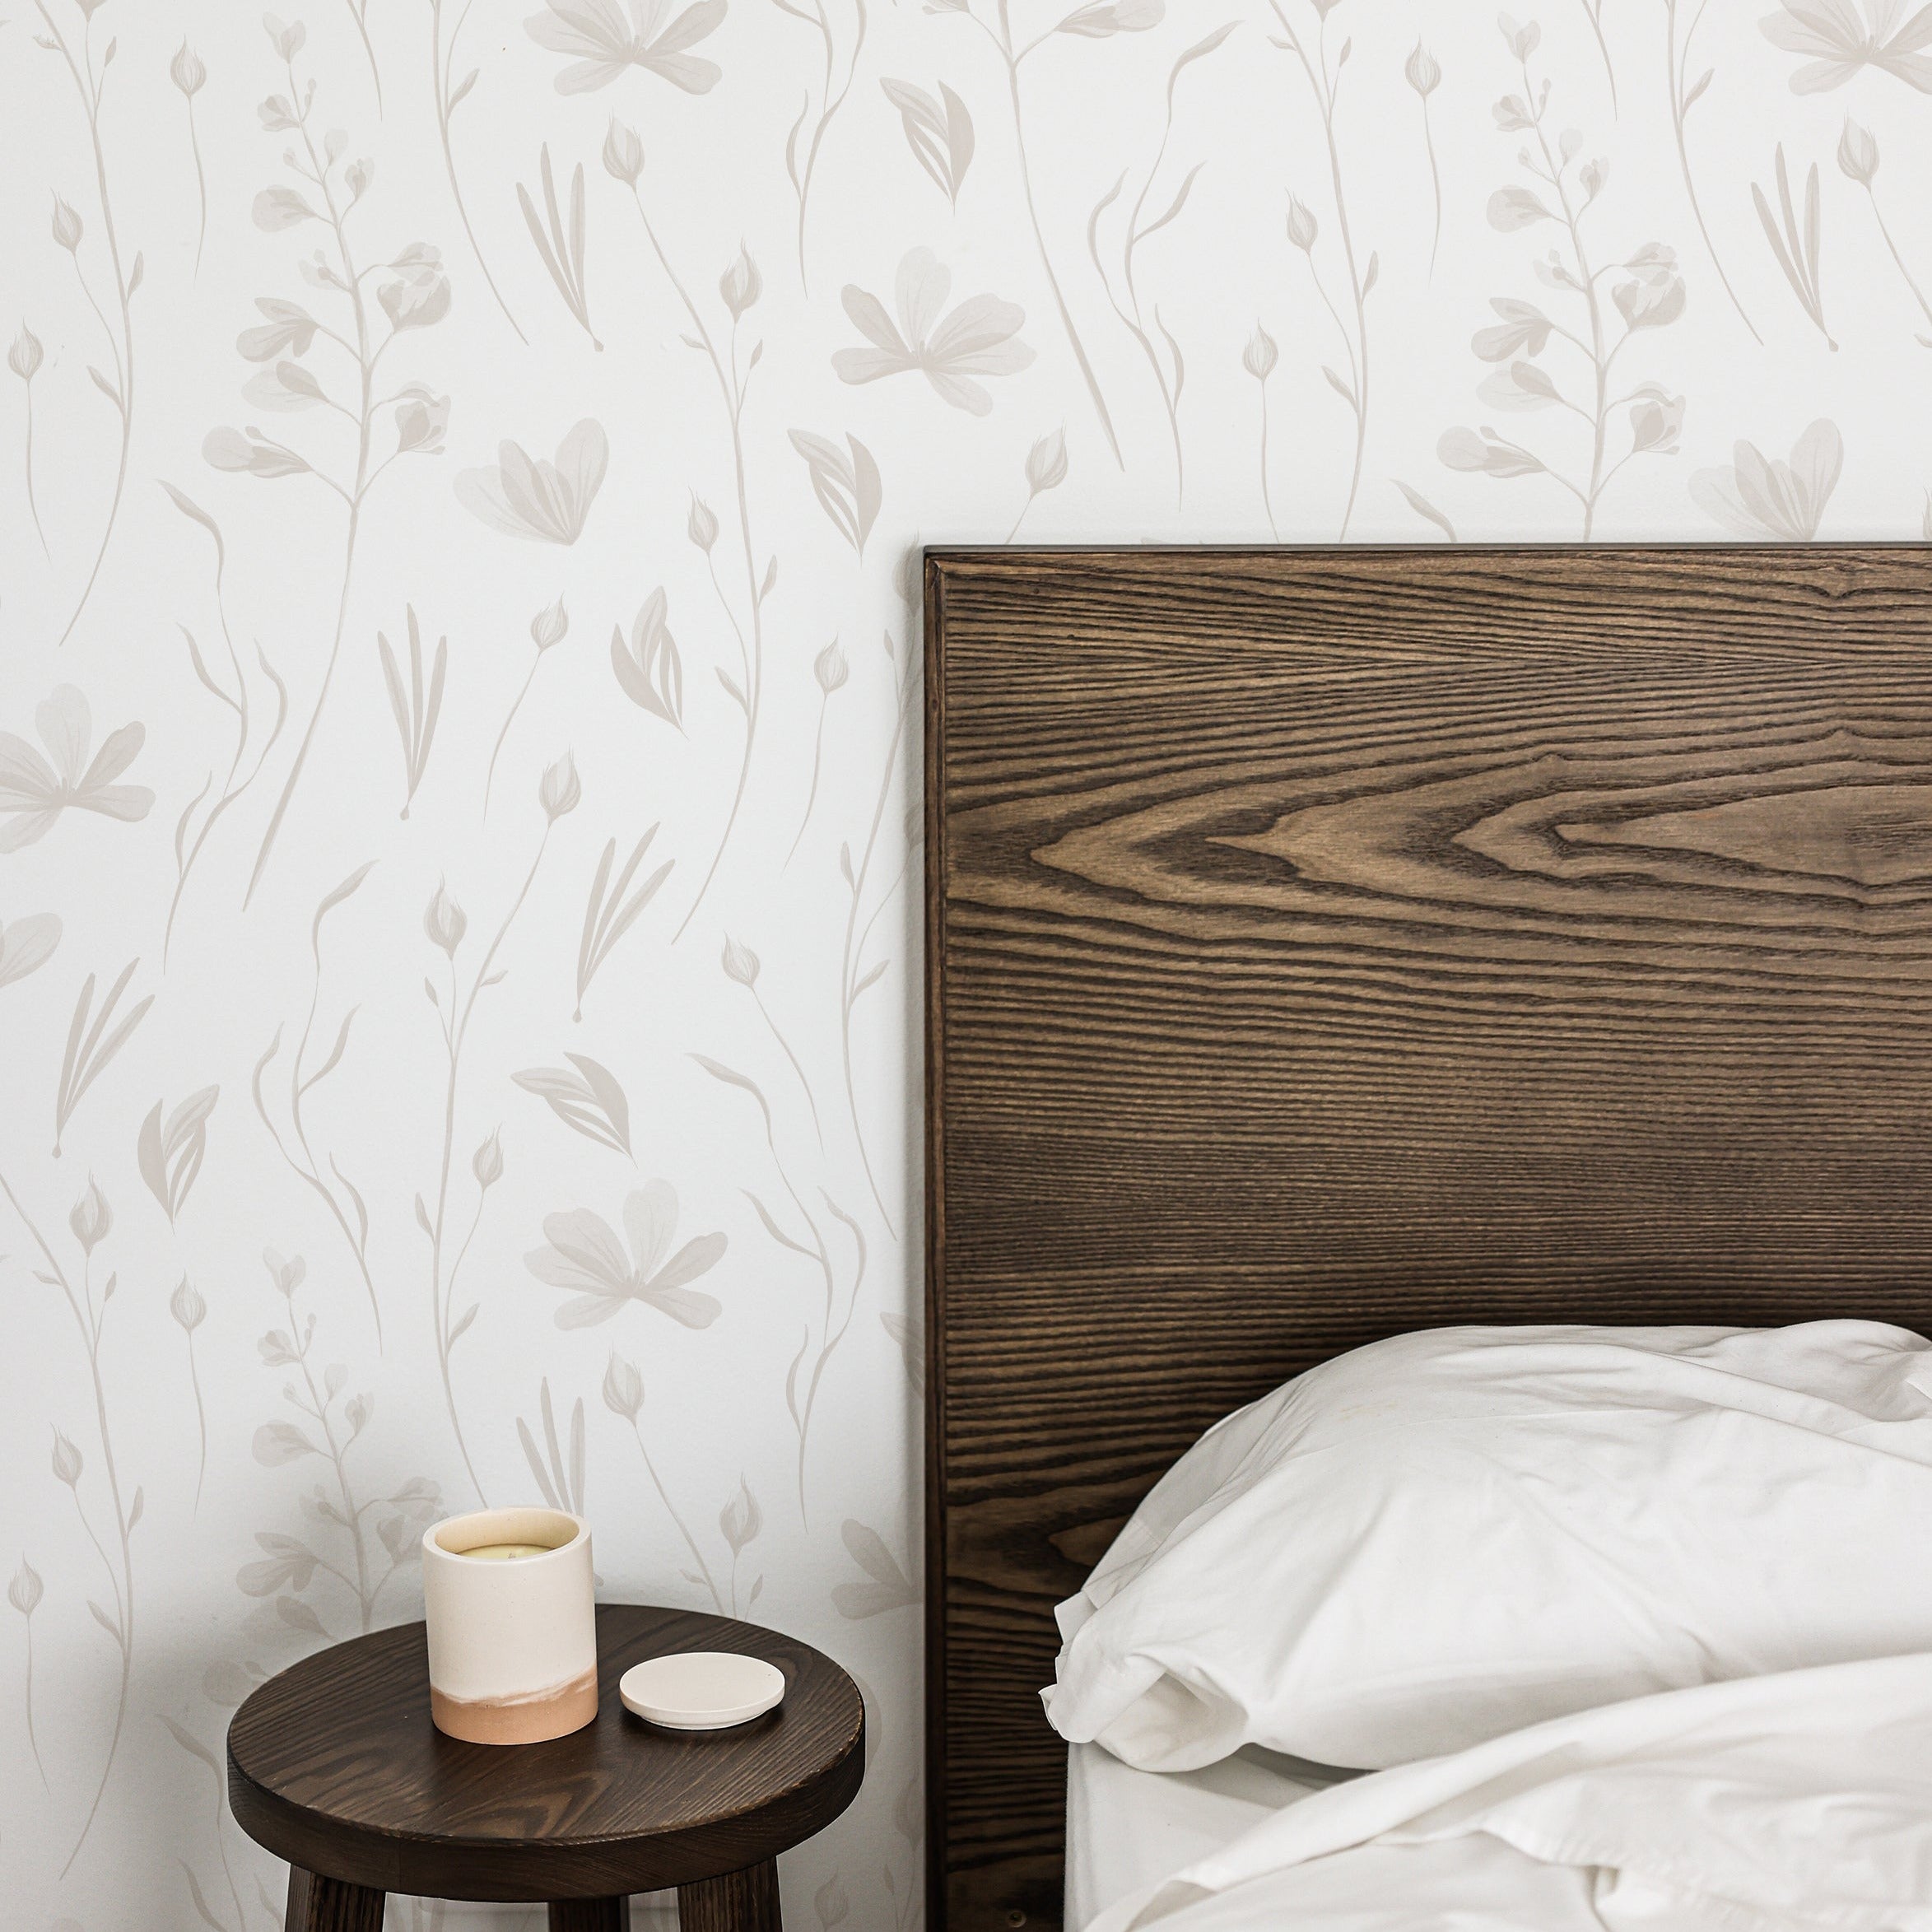 A bedroom scene with the wall featuring warm grey watercolor floral wallpaper, adding a tranquil and elegant atmosphere, alongside a dark wooden bed frame and a small round side table with a ceramic cup.